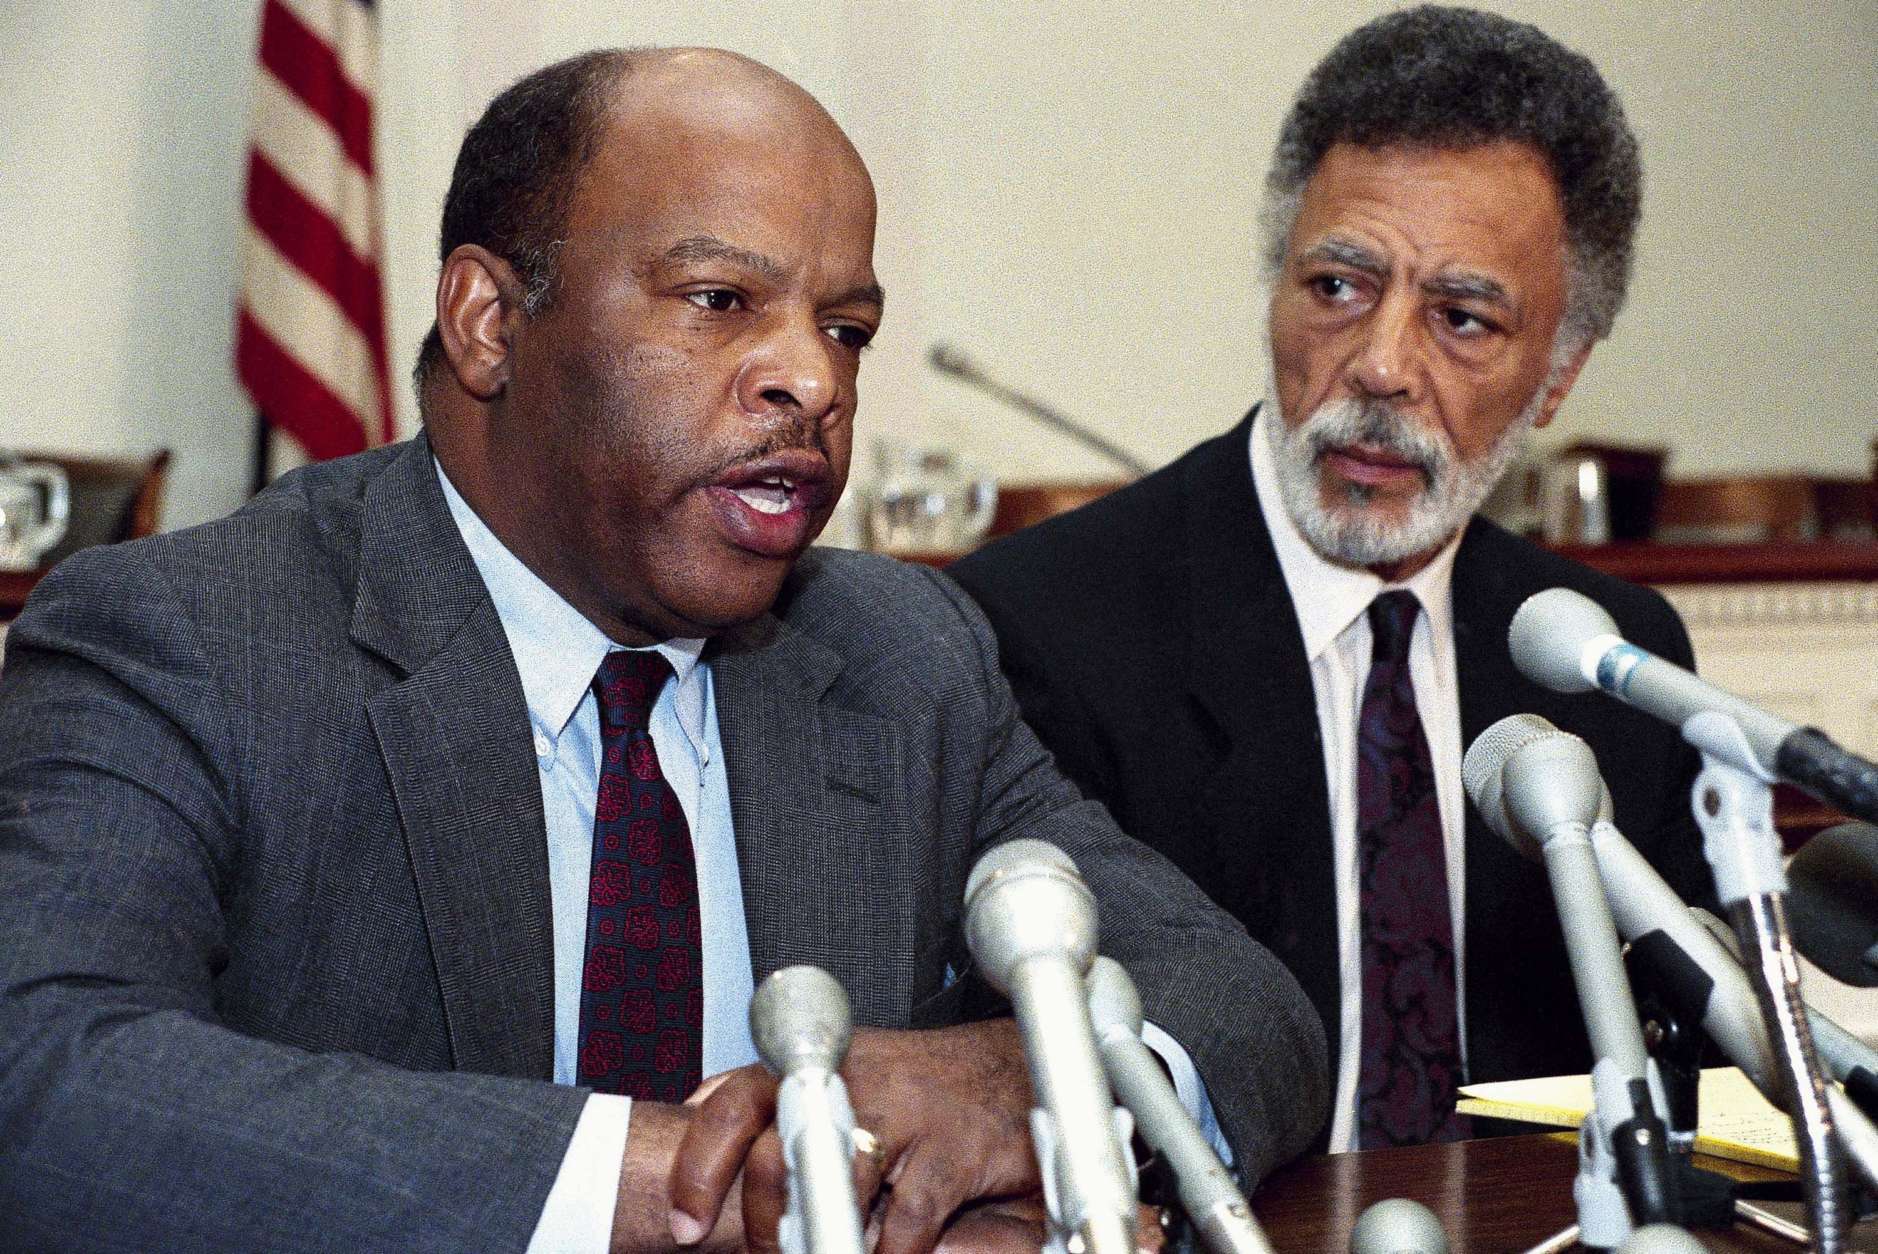 Reps. John Lewis, D-Ga., left, Ron Dellums, D-Calif., right, face reporters on Capitol Hill Sunday, Aug. 13, 1989 where they discuss the reported finding of a plane which carried Rep. Mickey Leland, D-Texas, and others aboard in Ethiopia. U.S. officials said no survivors were found. (AP Photo/Doug Mills)